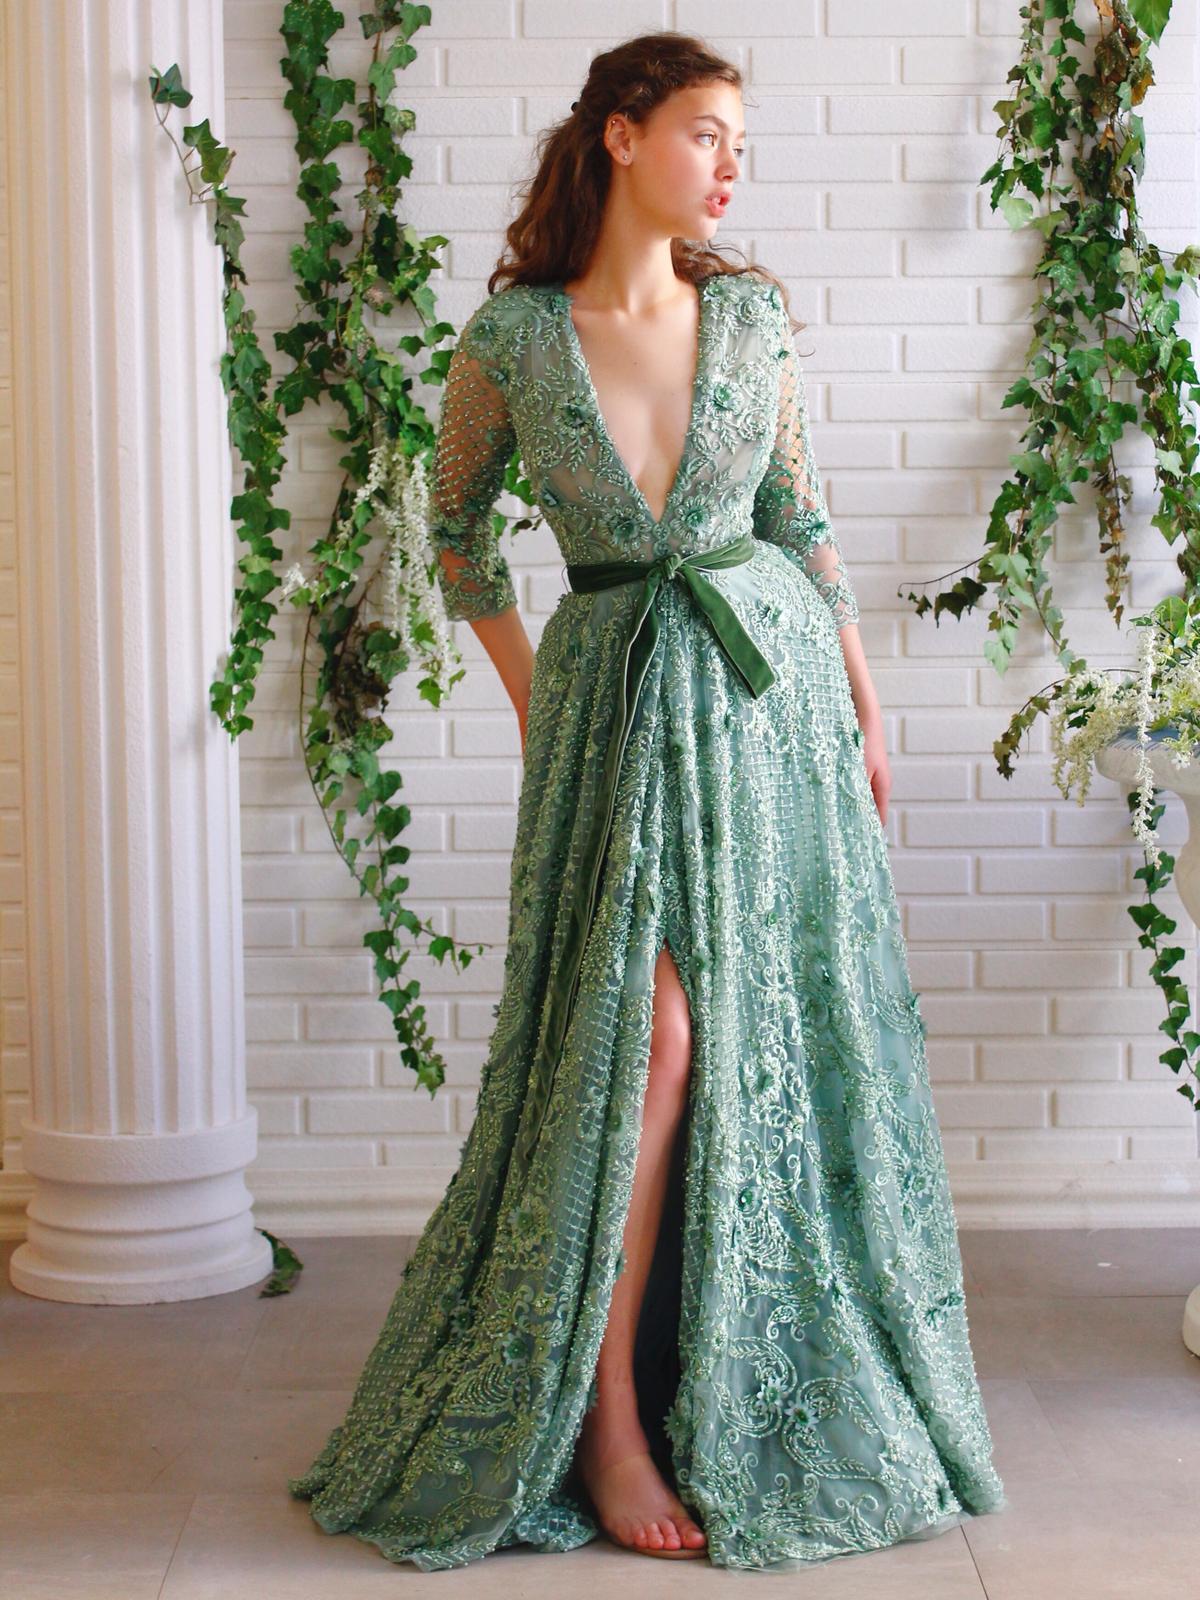 Green A-Line dress with lace, long sleeves and v-neck